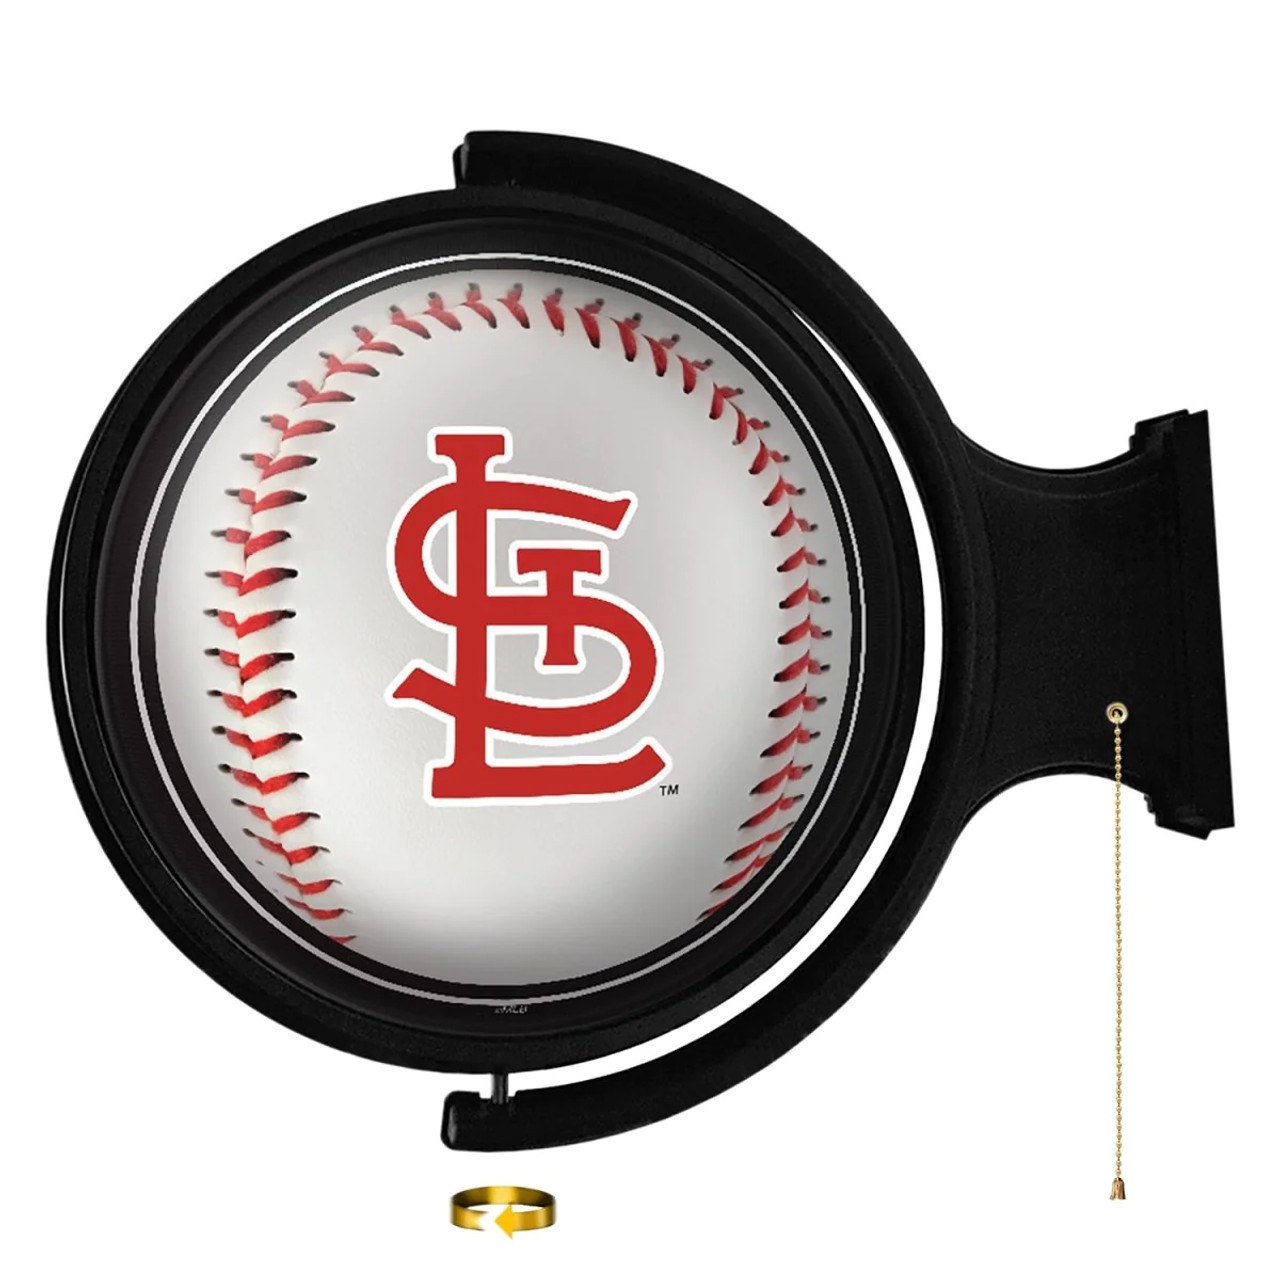 STL, St Louis, Cards, Cardinals, Baseball, Original, Round, Rotating, Lighted, Wall, Sign, MBSTLC-115-31, The Fan-Brand, MLB, 704384952411